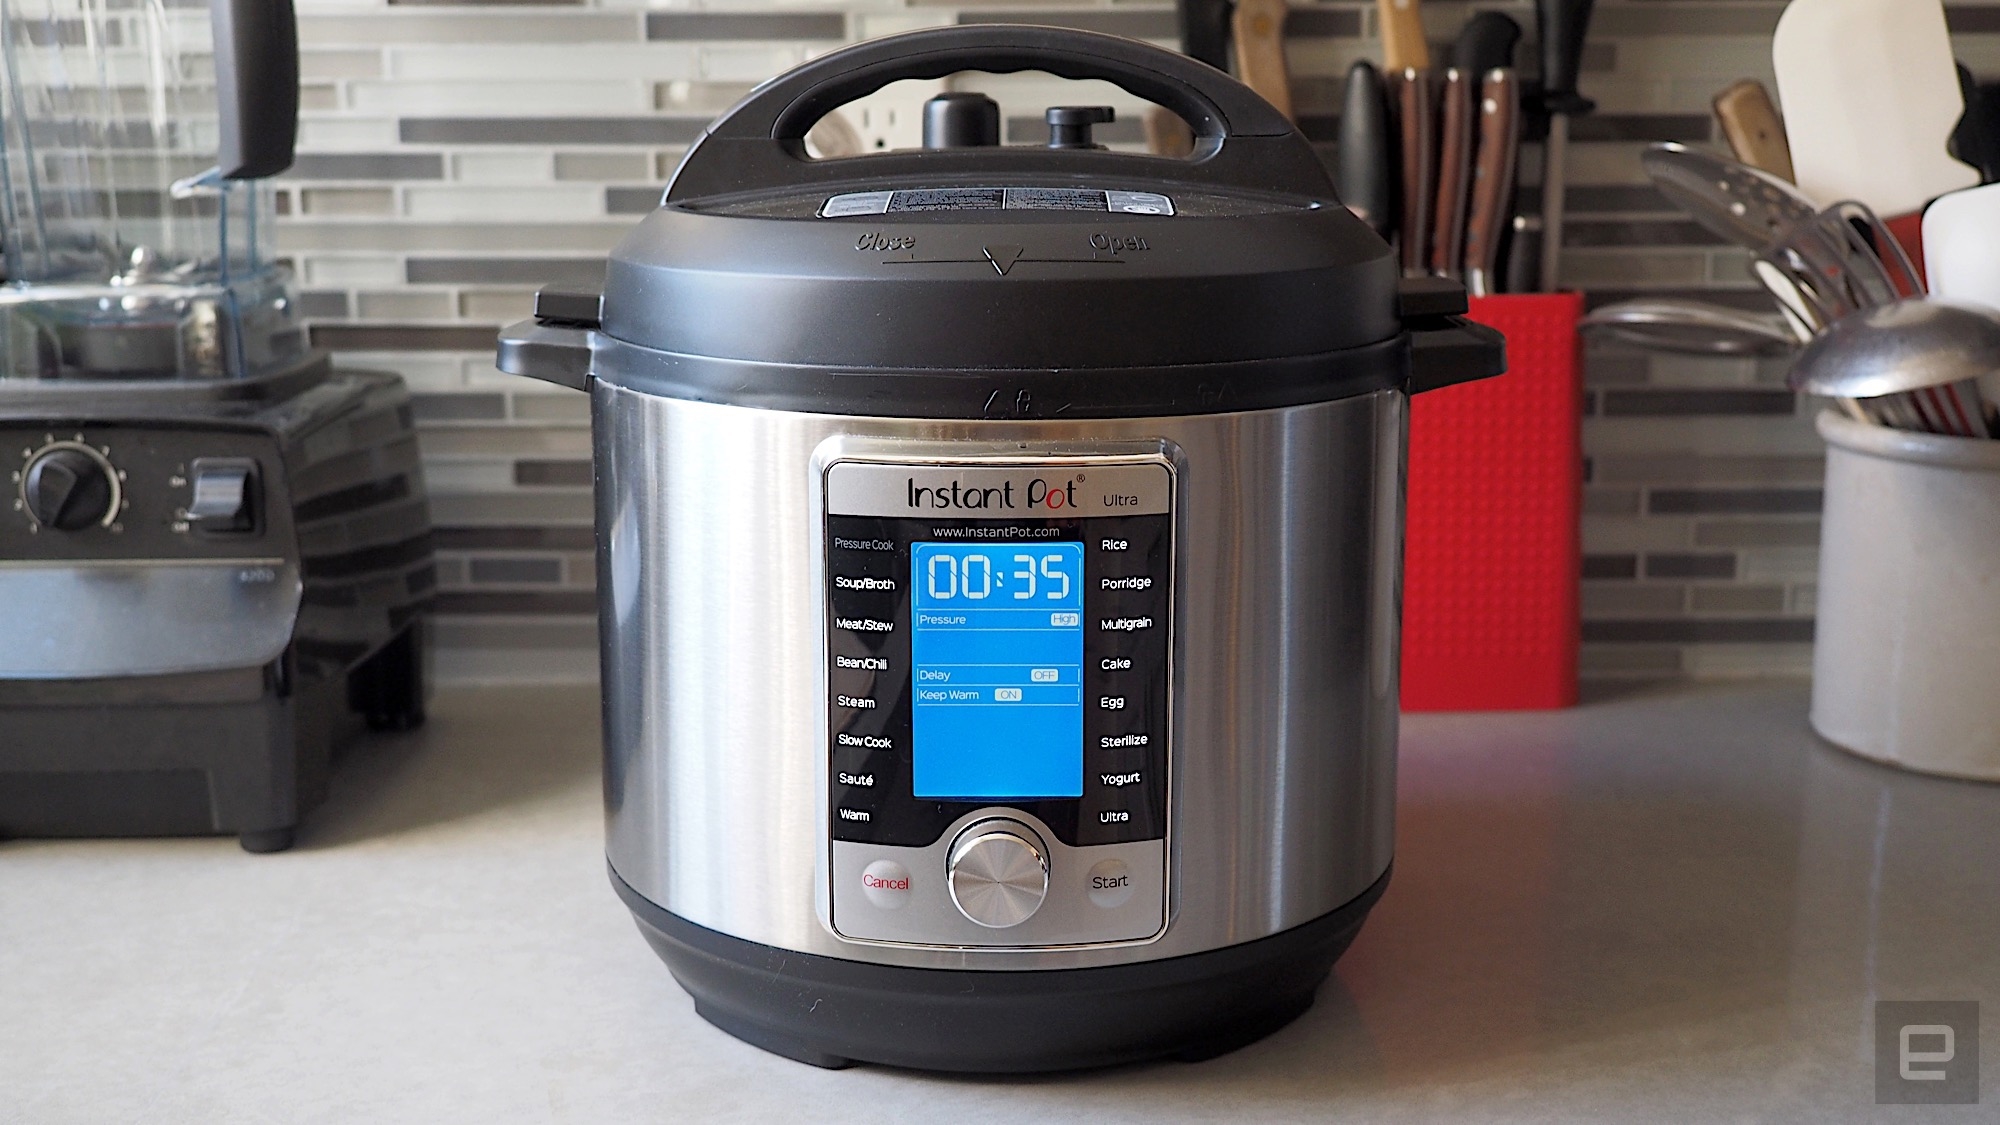 How to make the most of that Instant Pot you just bought | DeviceDaily.com